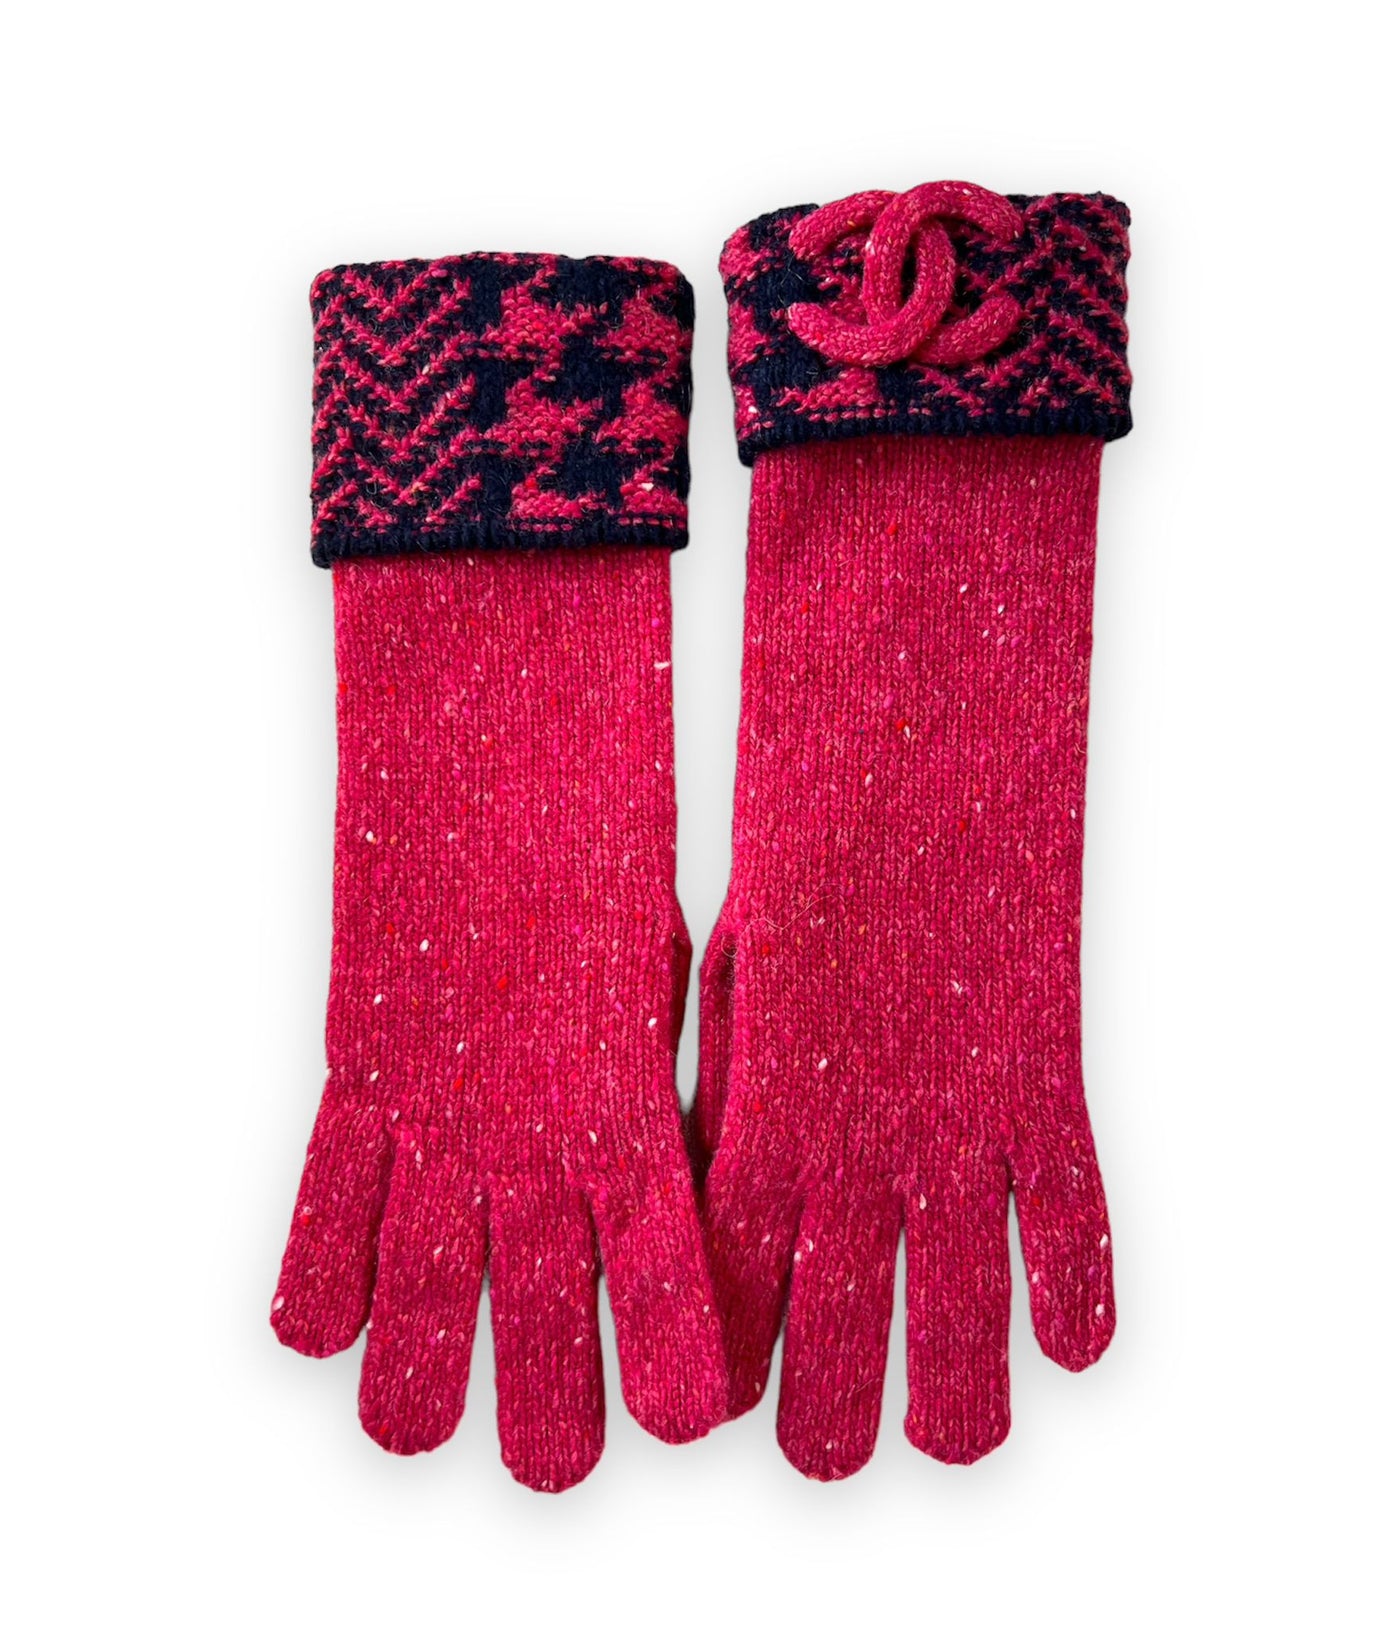 CHANEL cashmere set hat and gloves